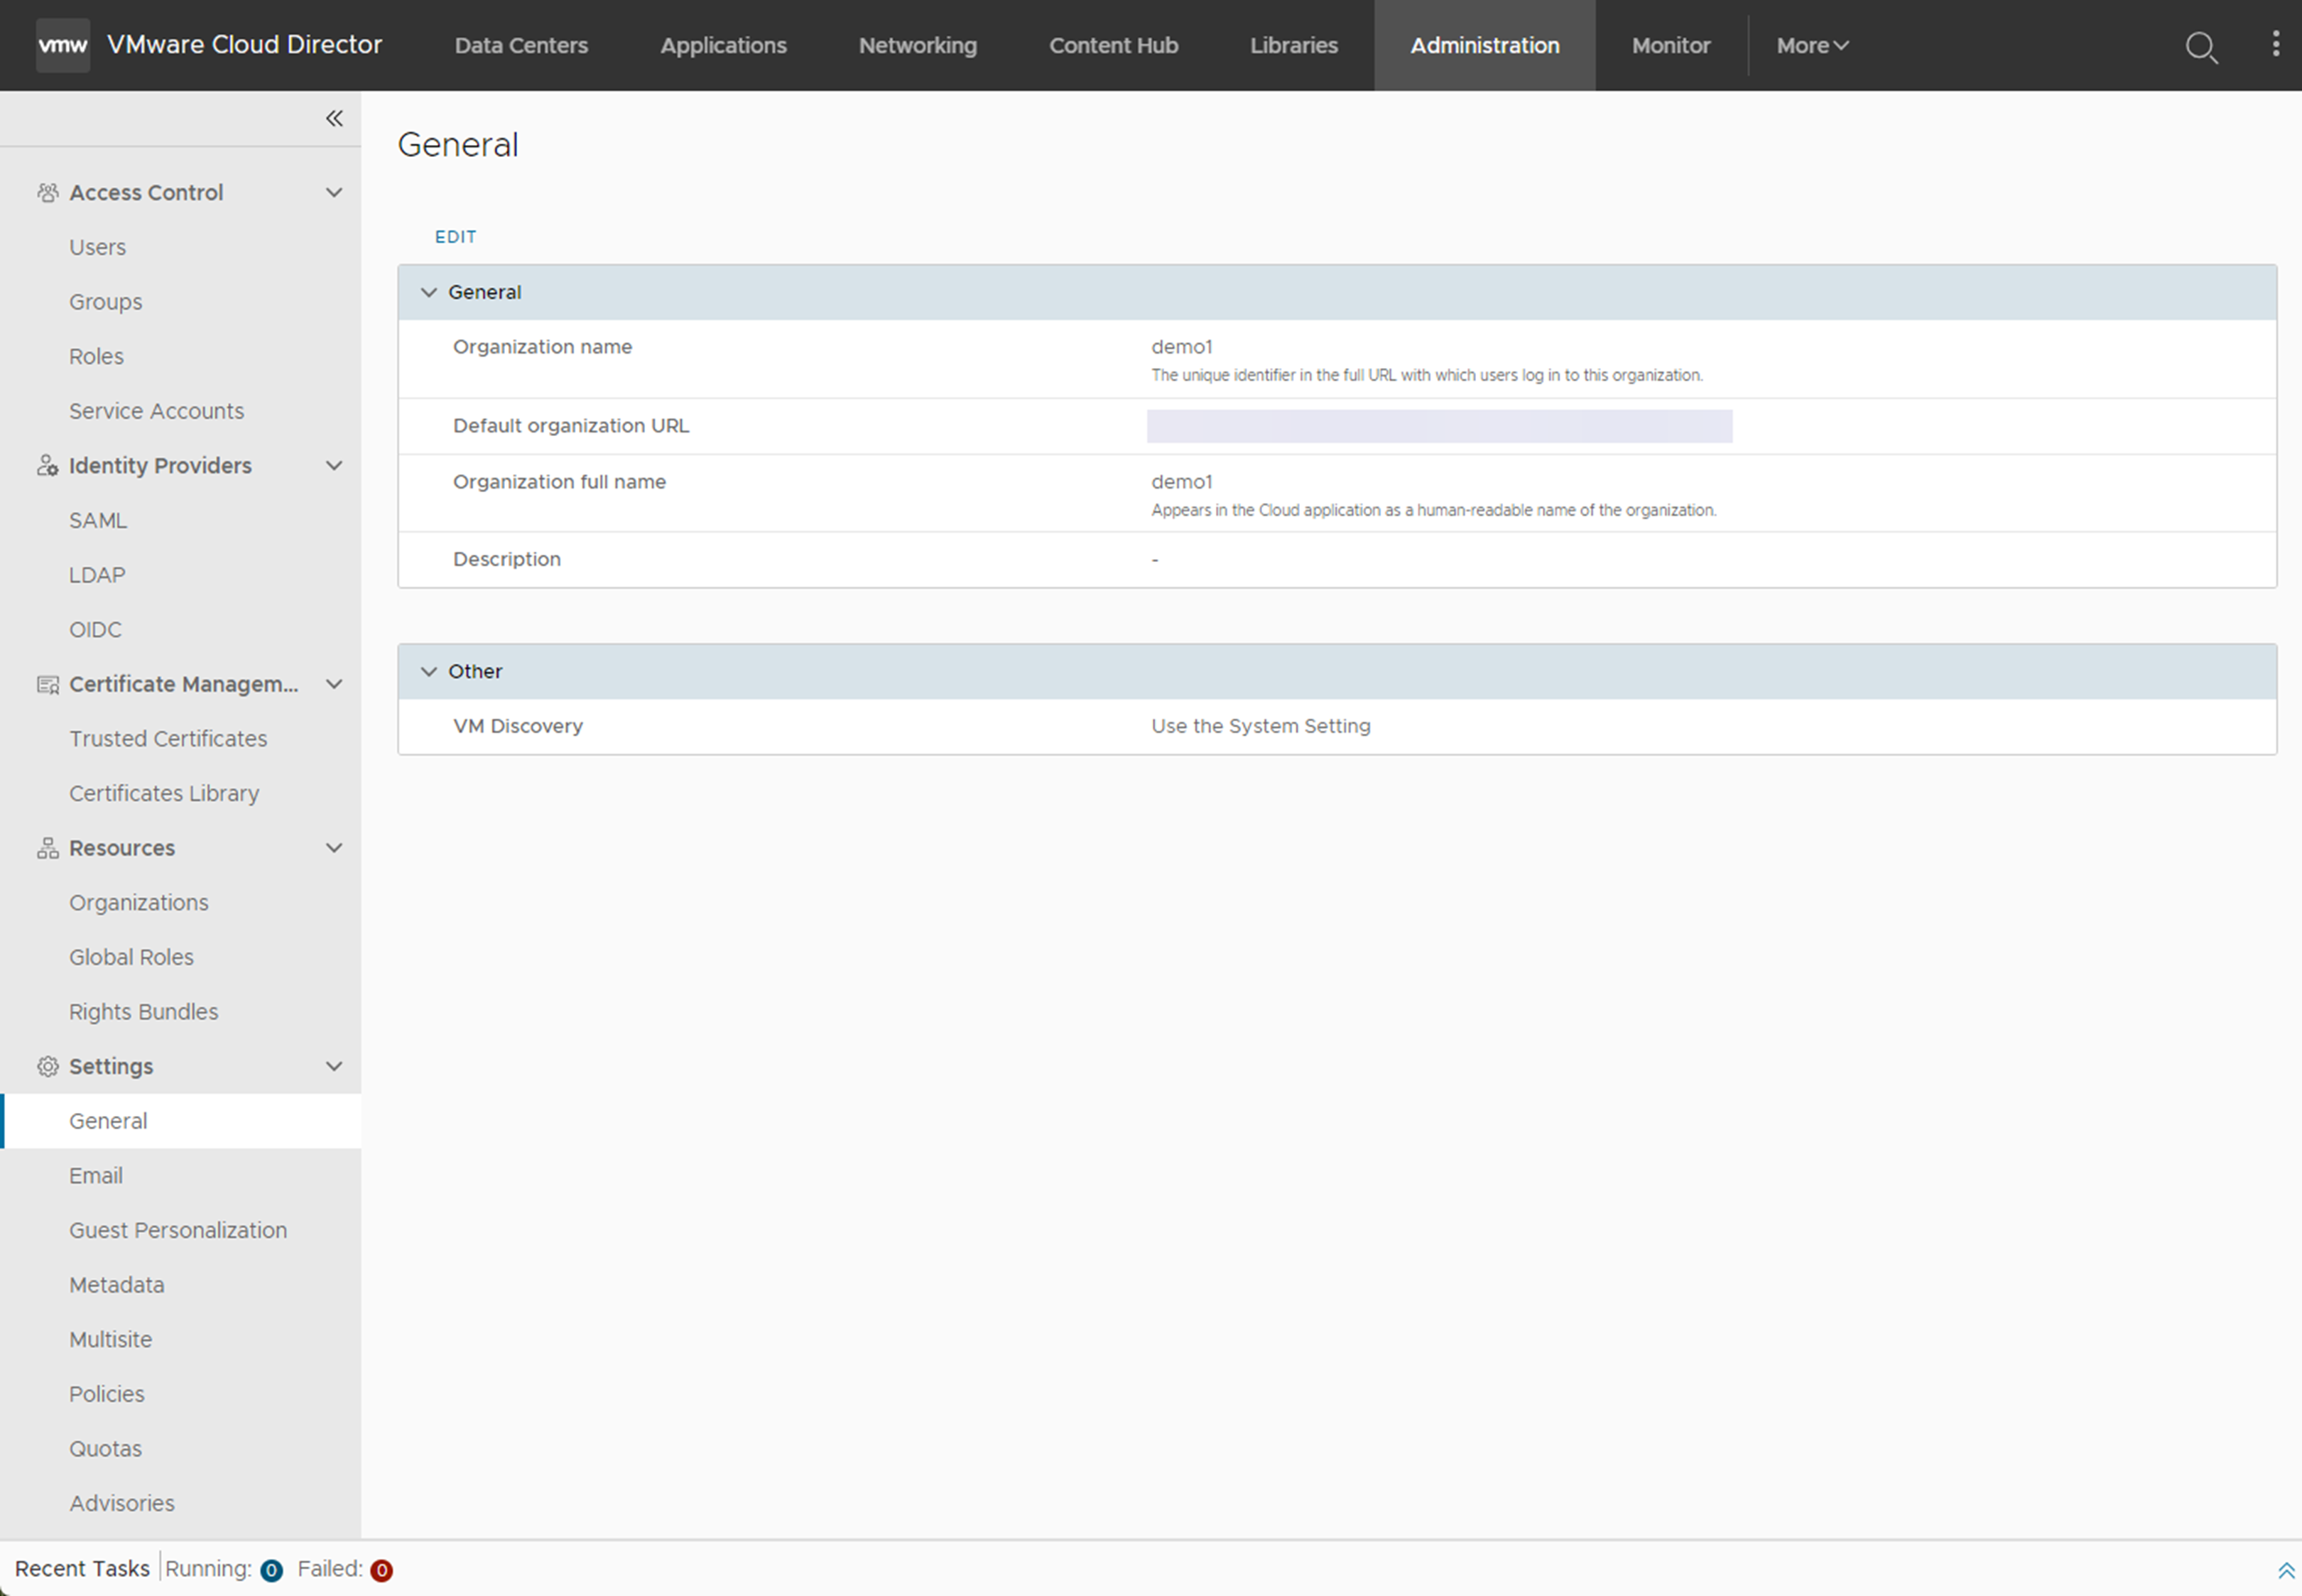 You can view and edit the general organization settings, including the VM Discovery setting.